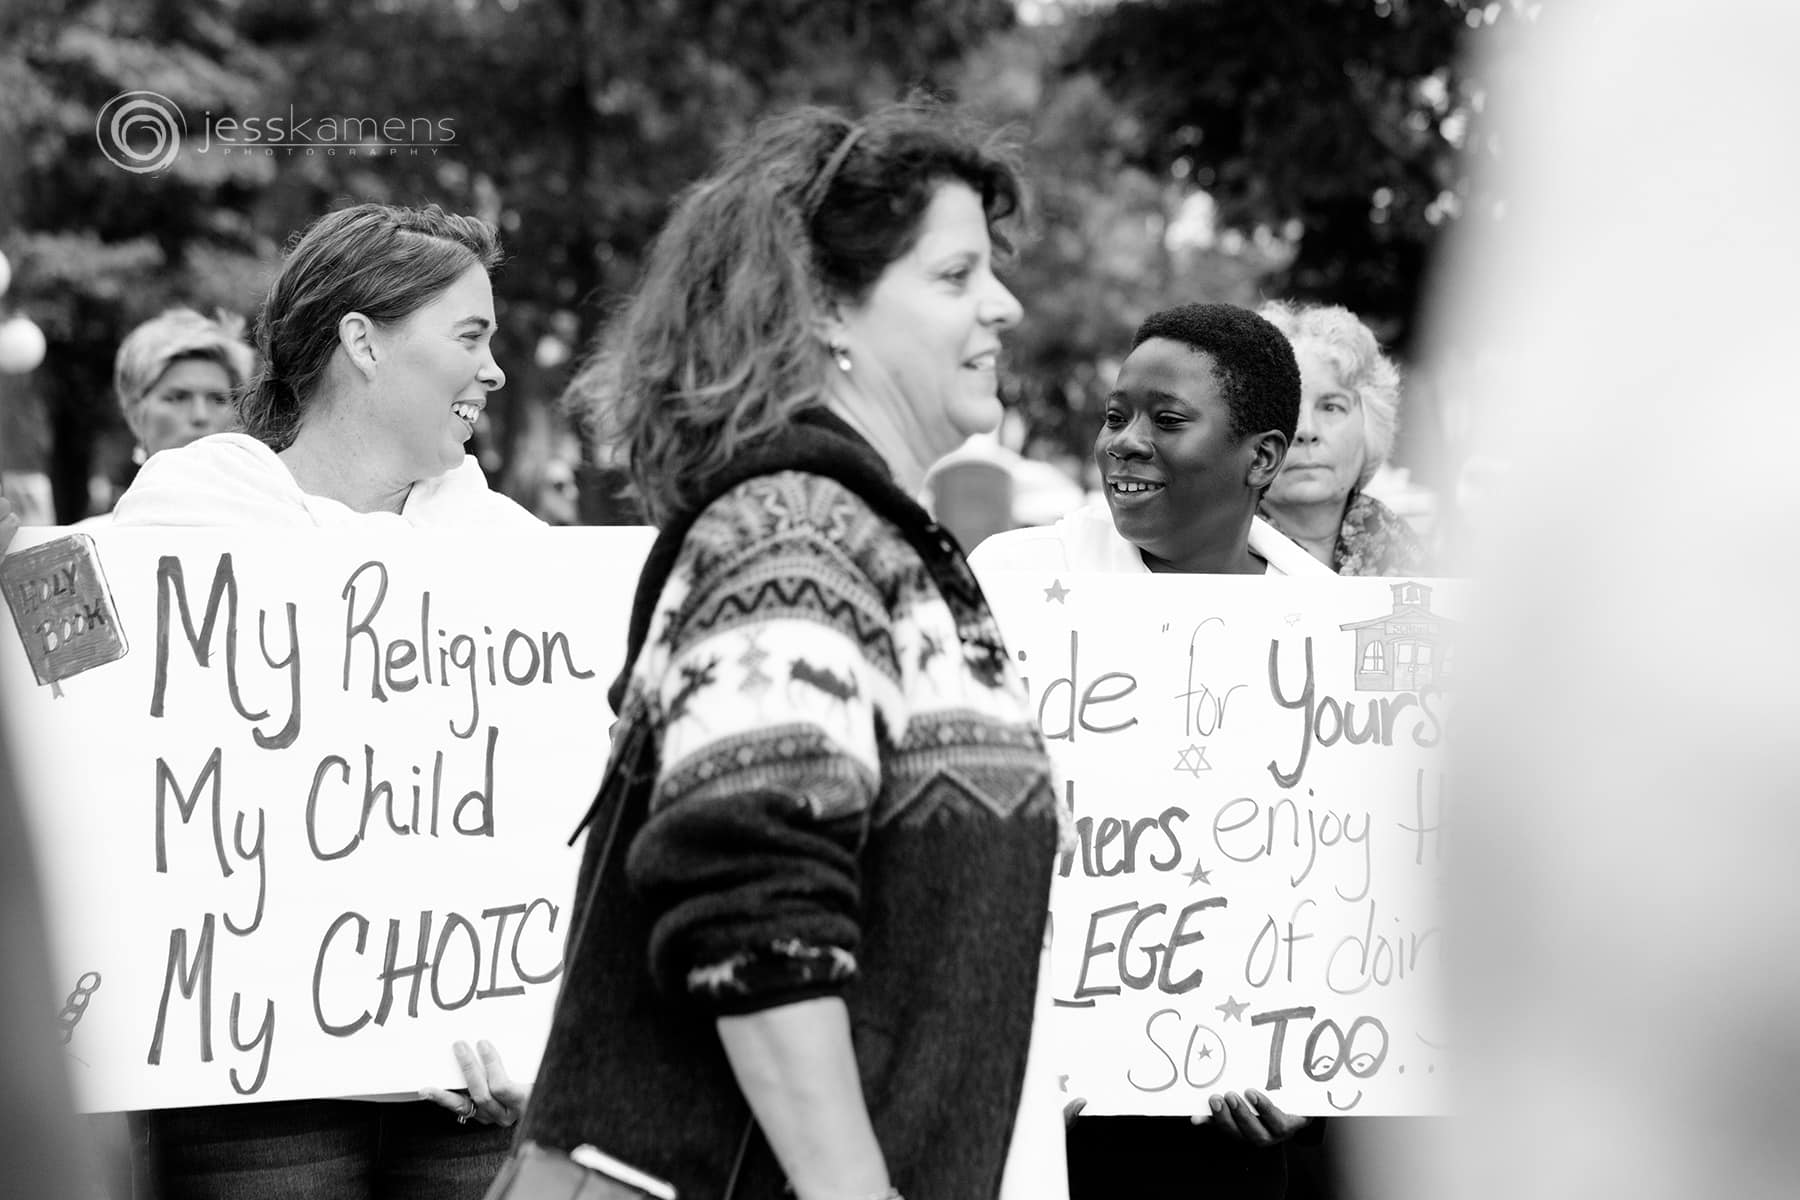 signs at a rally for religious freedom and the right to choose vaccinations in New York